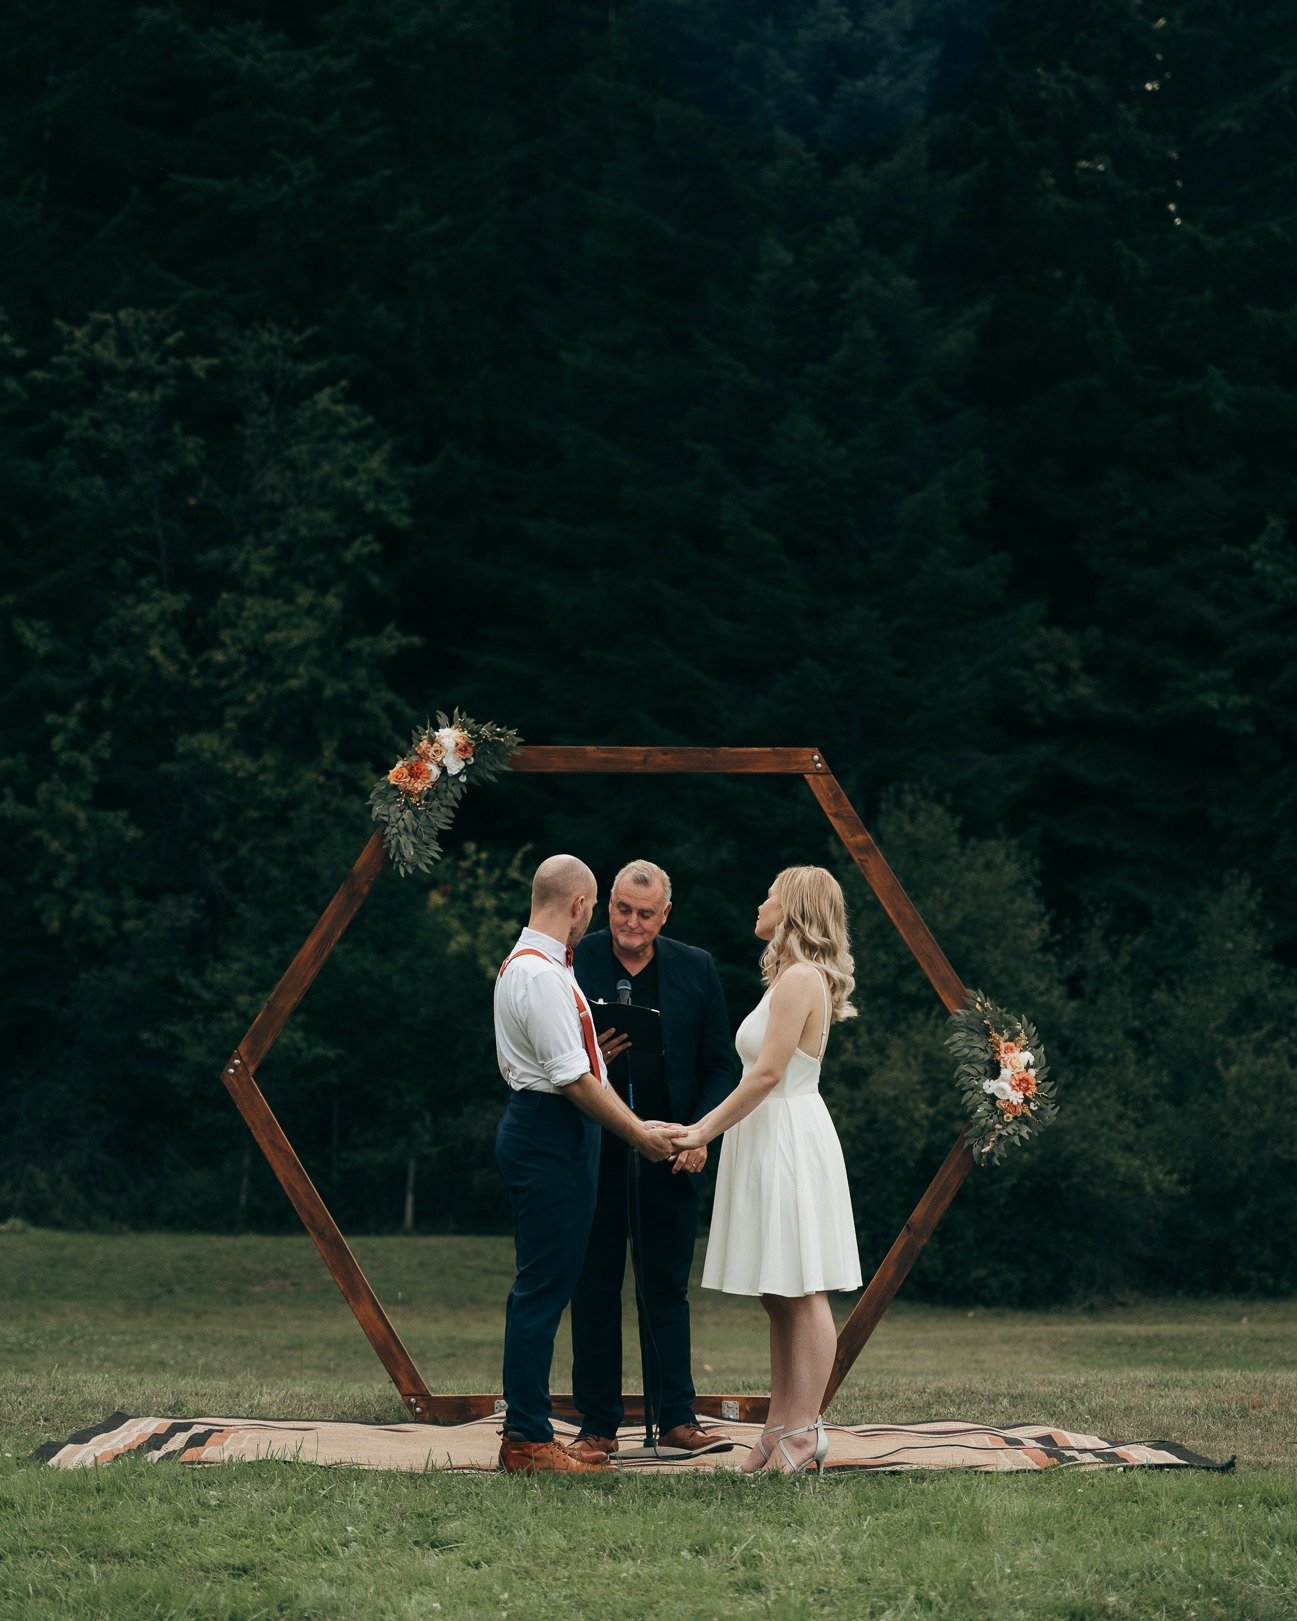 Epic Elopement Locations in North Idaho

Looking for elopement location inspiration? I&rsquo;ve got you covered! Here are a few epic locations to elope at in North Idaho!

🏕️ Farragut State Park
Sitting on the shores of Lake Pend Oreille, this Idaho